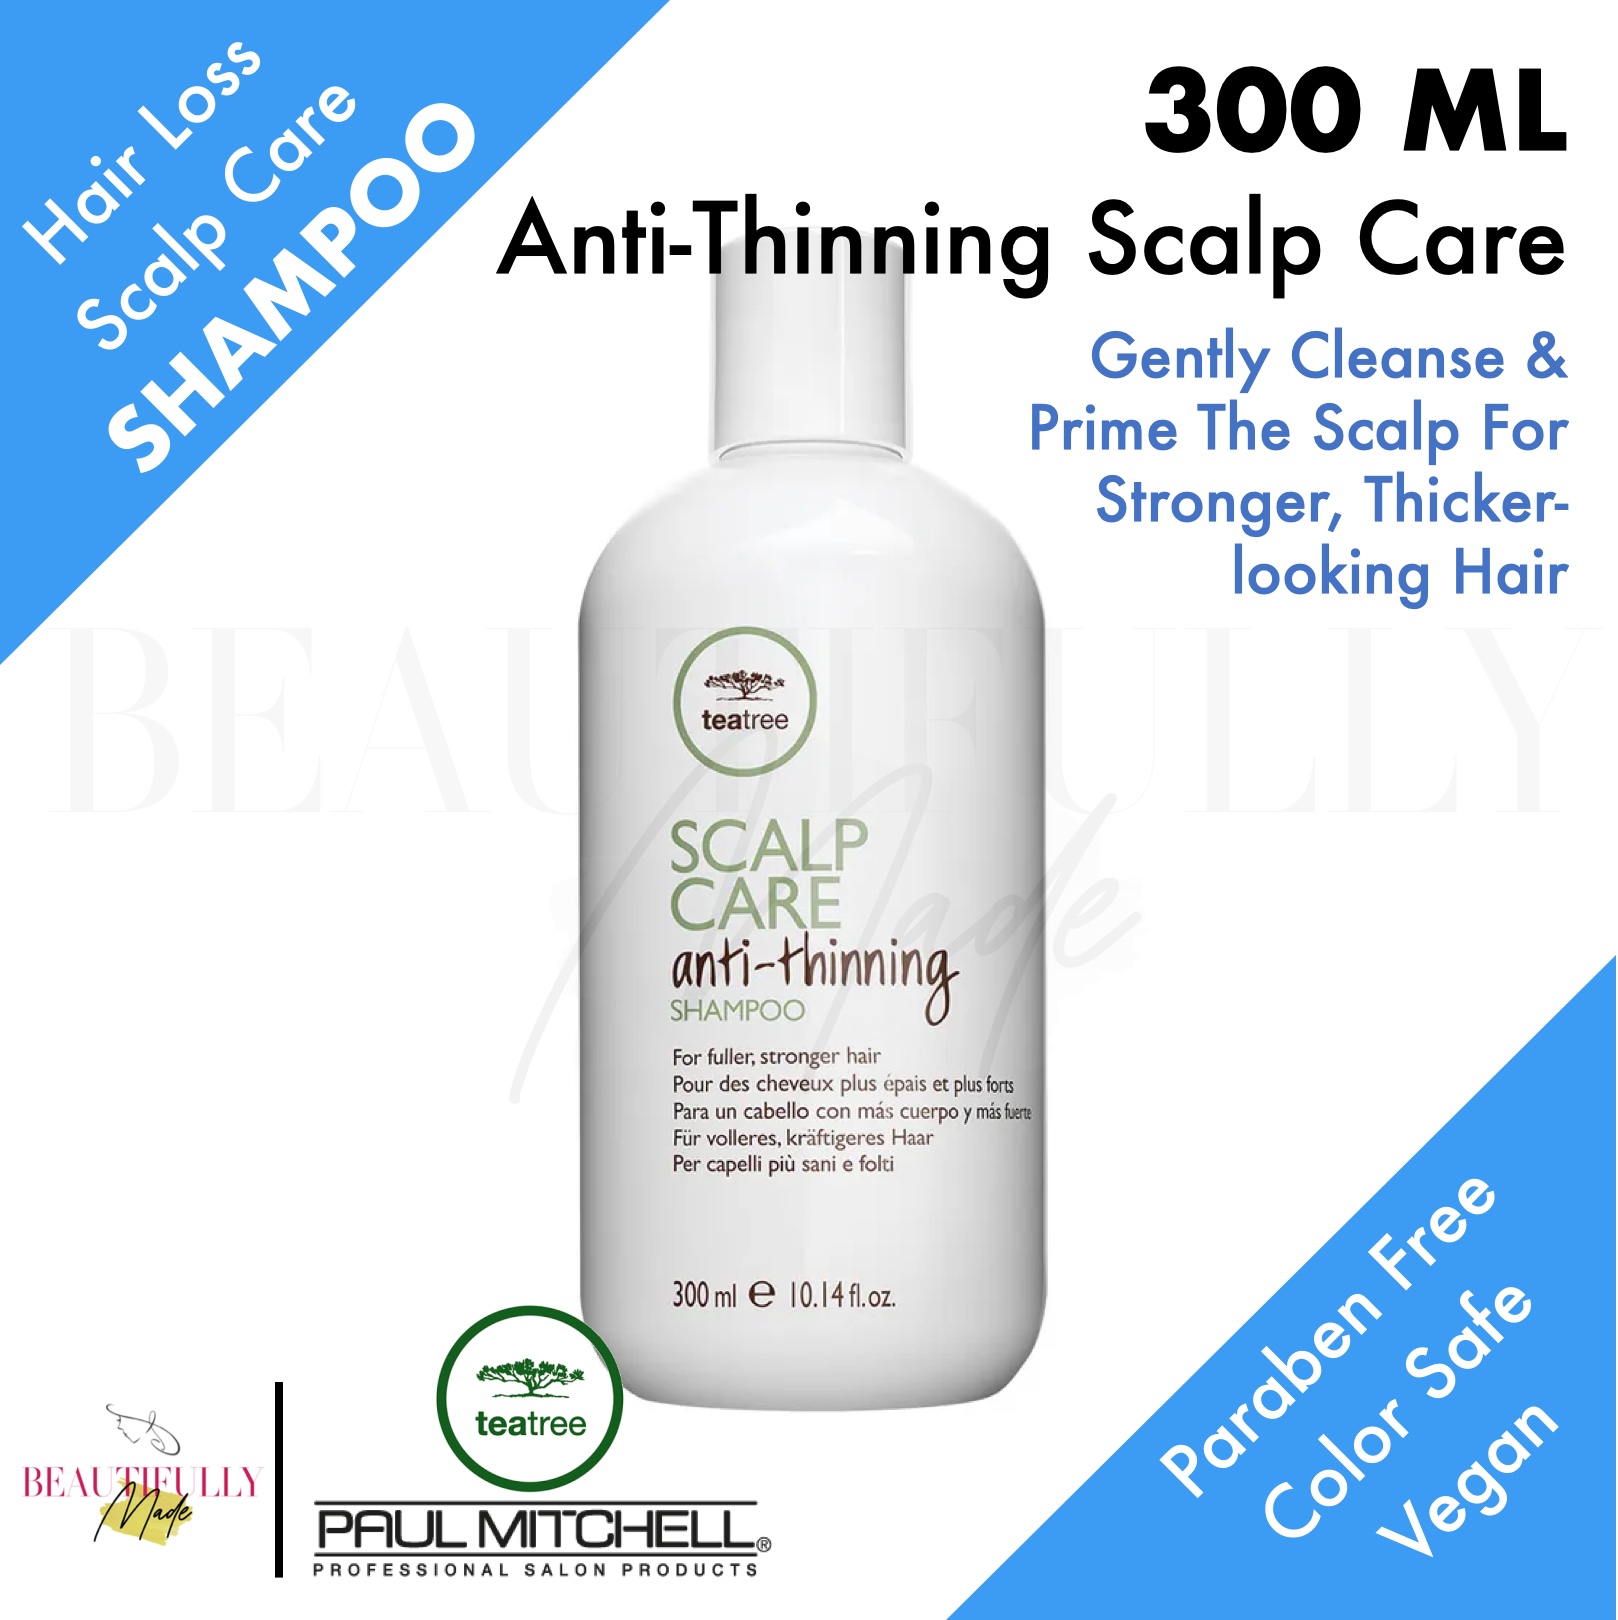 kalender Snor kilometer Paul Mitchell Tea Tree Scalp Care Anti-Thinning Shampoo 300ml - Purifying  Cooling Mint Gentle Daily Cleanser Clarifying Deep Cleanse Remove Oil  Dandruff Scalp Care Rebalancing Hairloss Hair Fall Loss Growth (Expiry: Jun